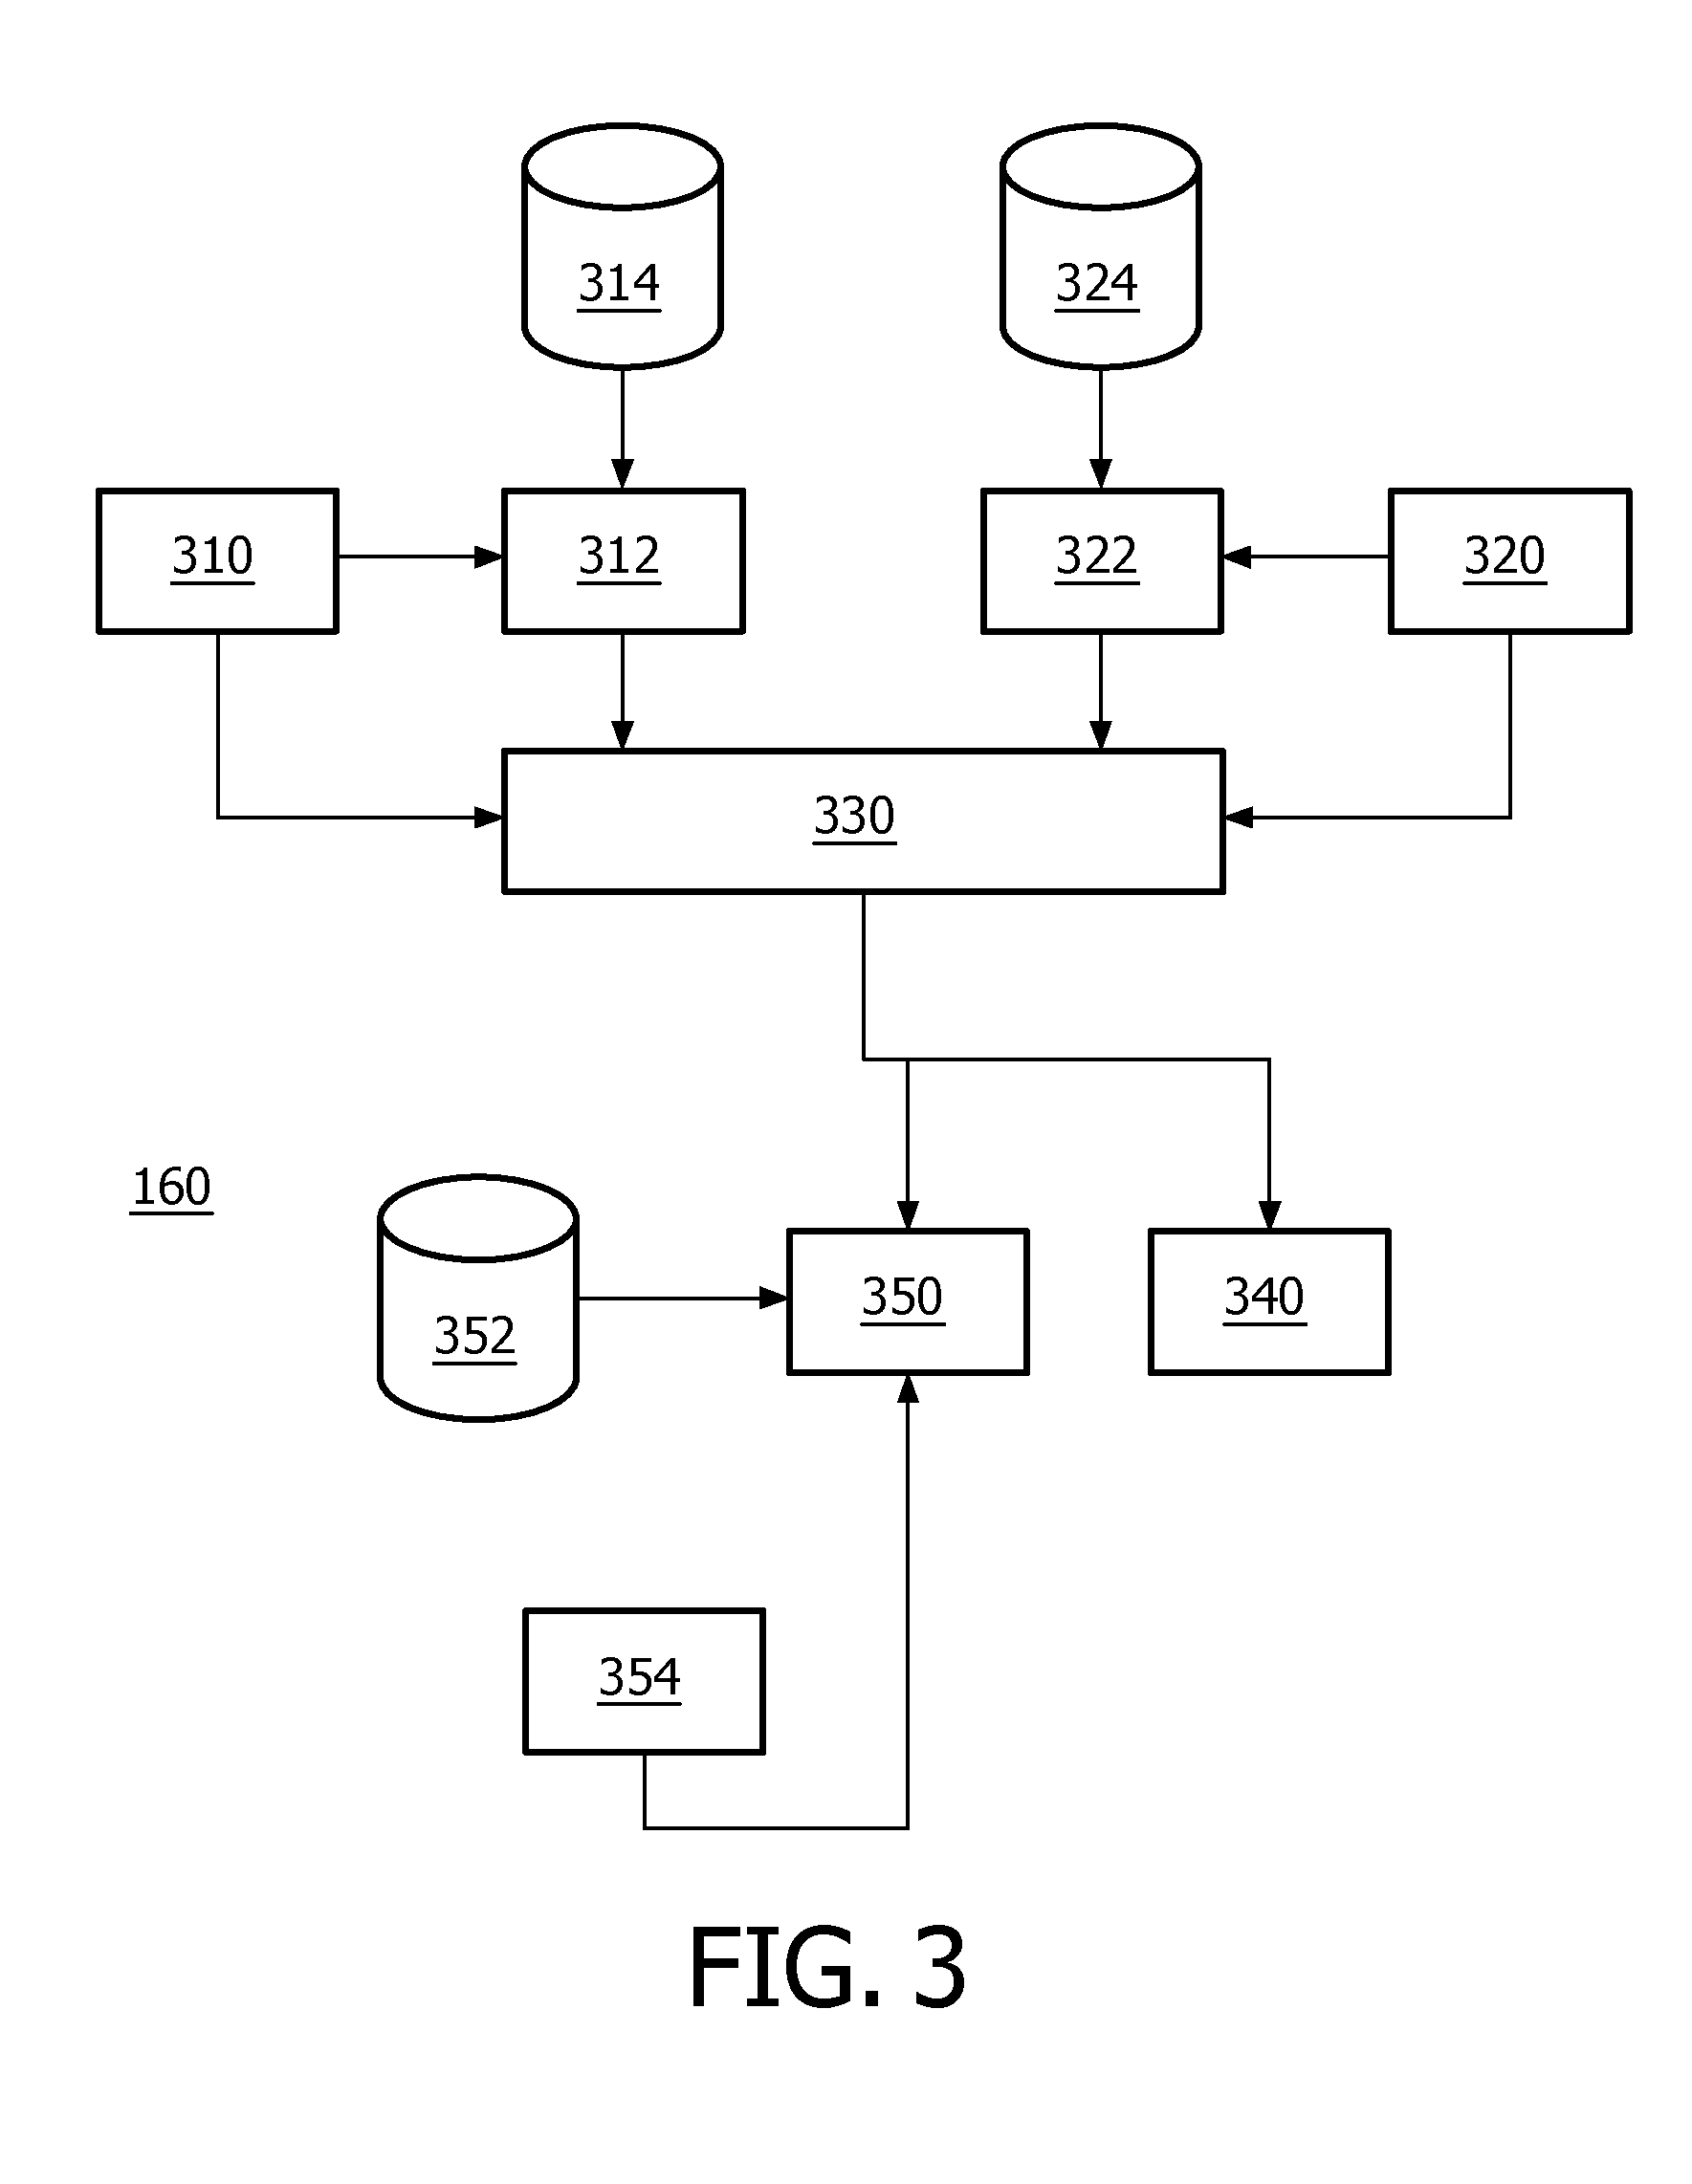 Device and method for routing a medical alert to a selected staff member